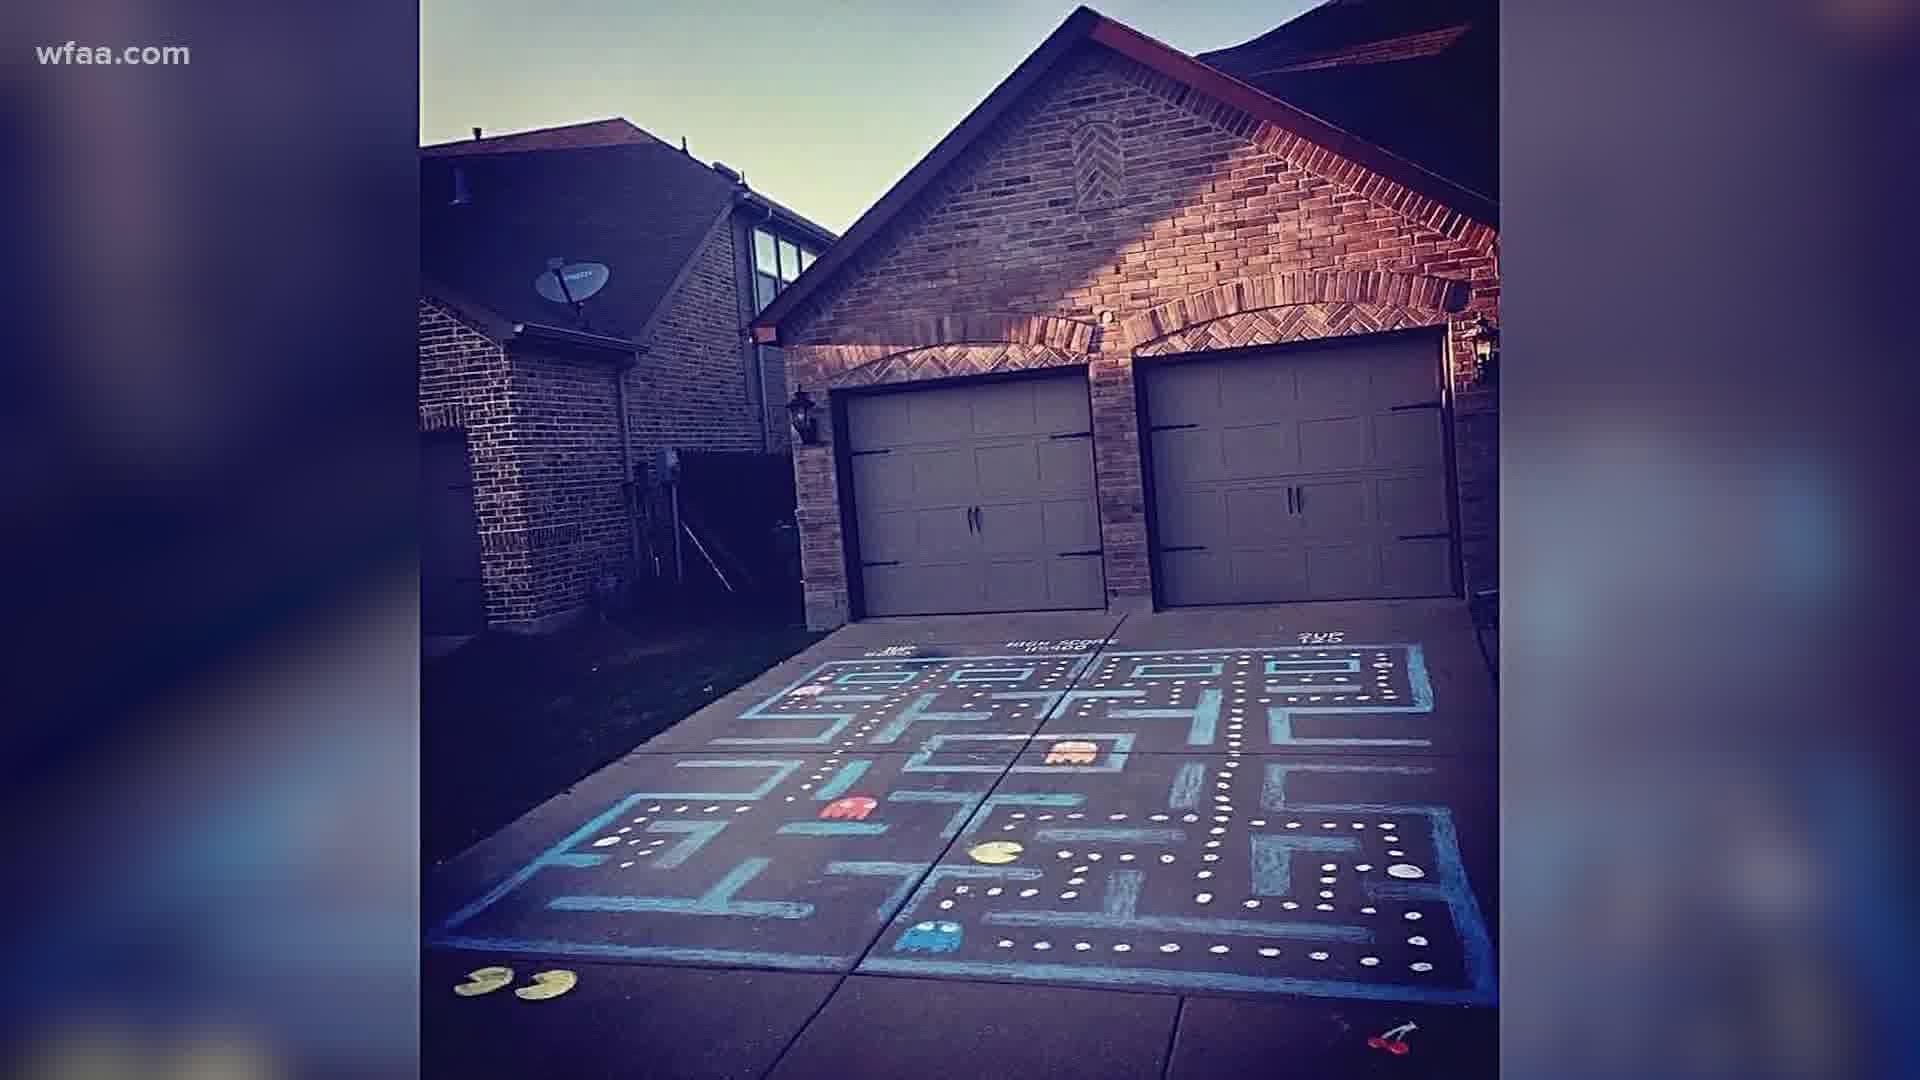 You've gotta chalk it up to her creativity. Right?